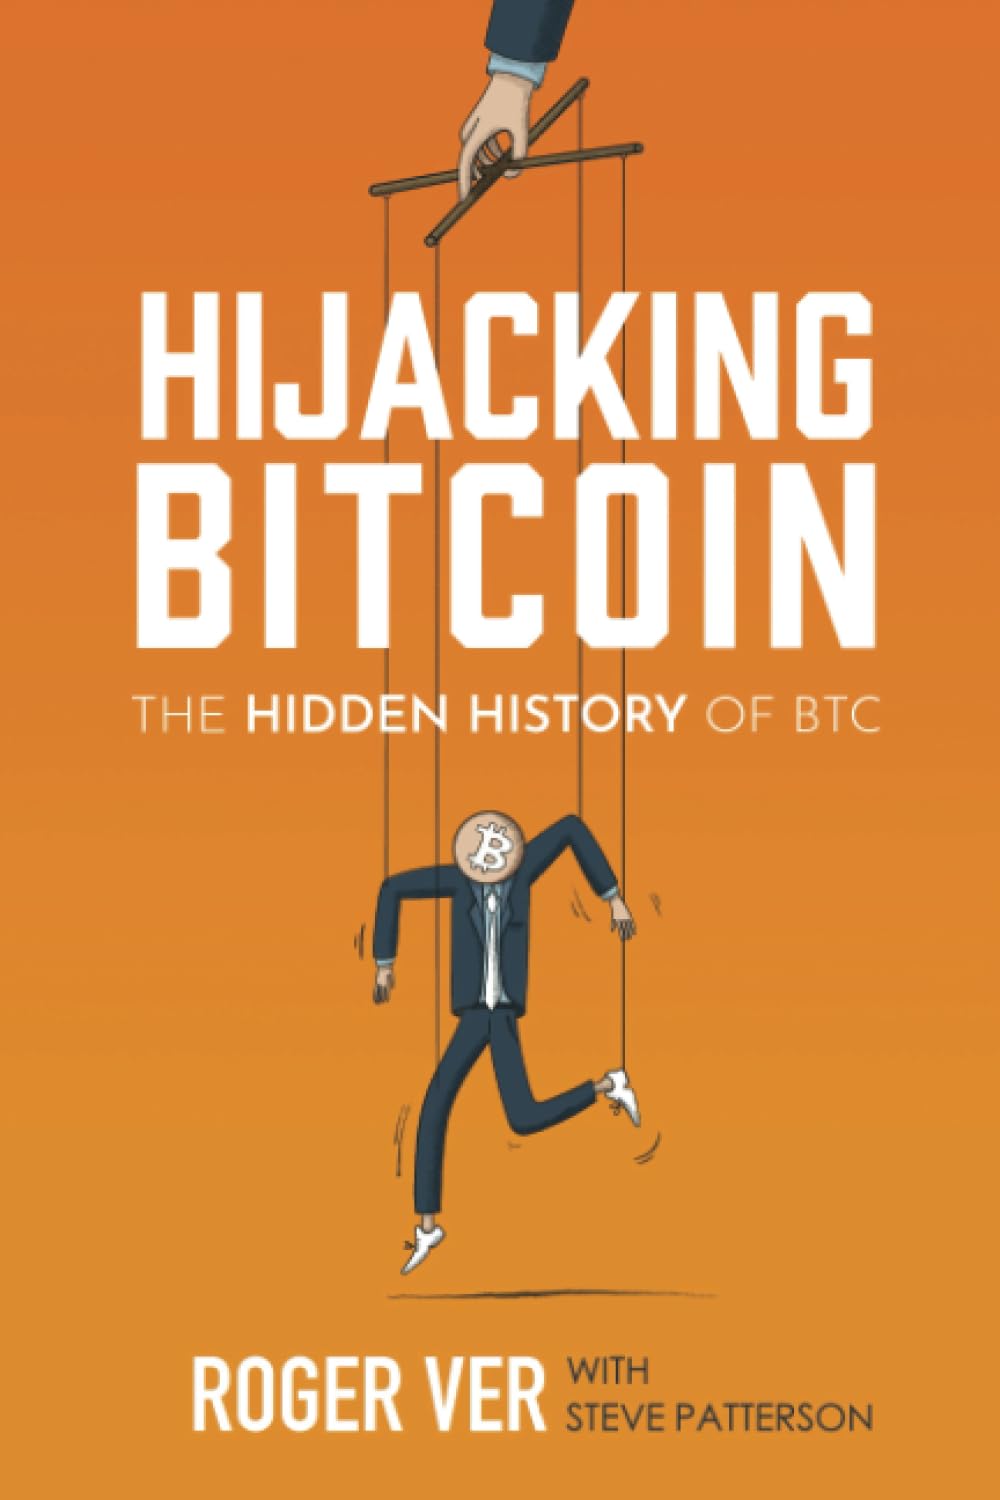 Hijacking Bitcoin: The Hidden History of BTC, by Roger Ver (Author), Steve Patterson (Contributor)